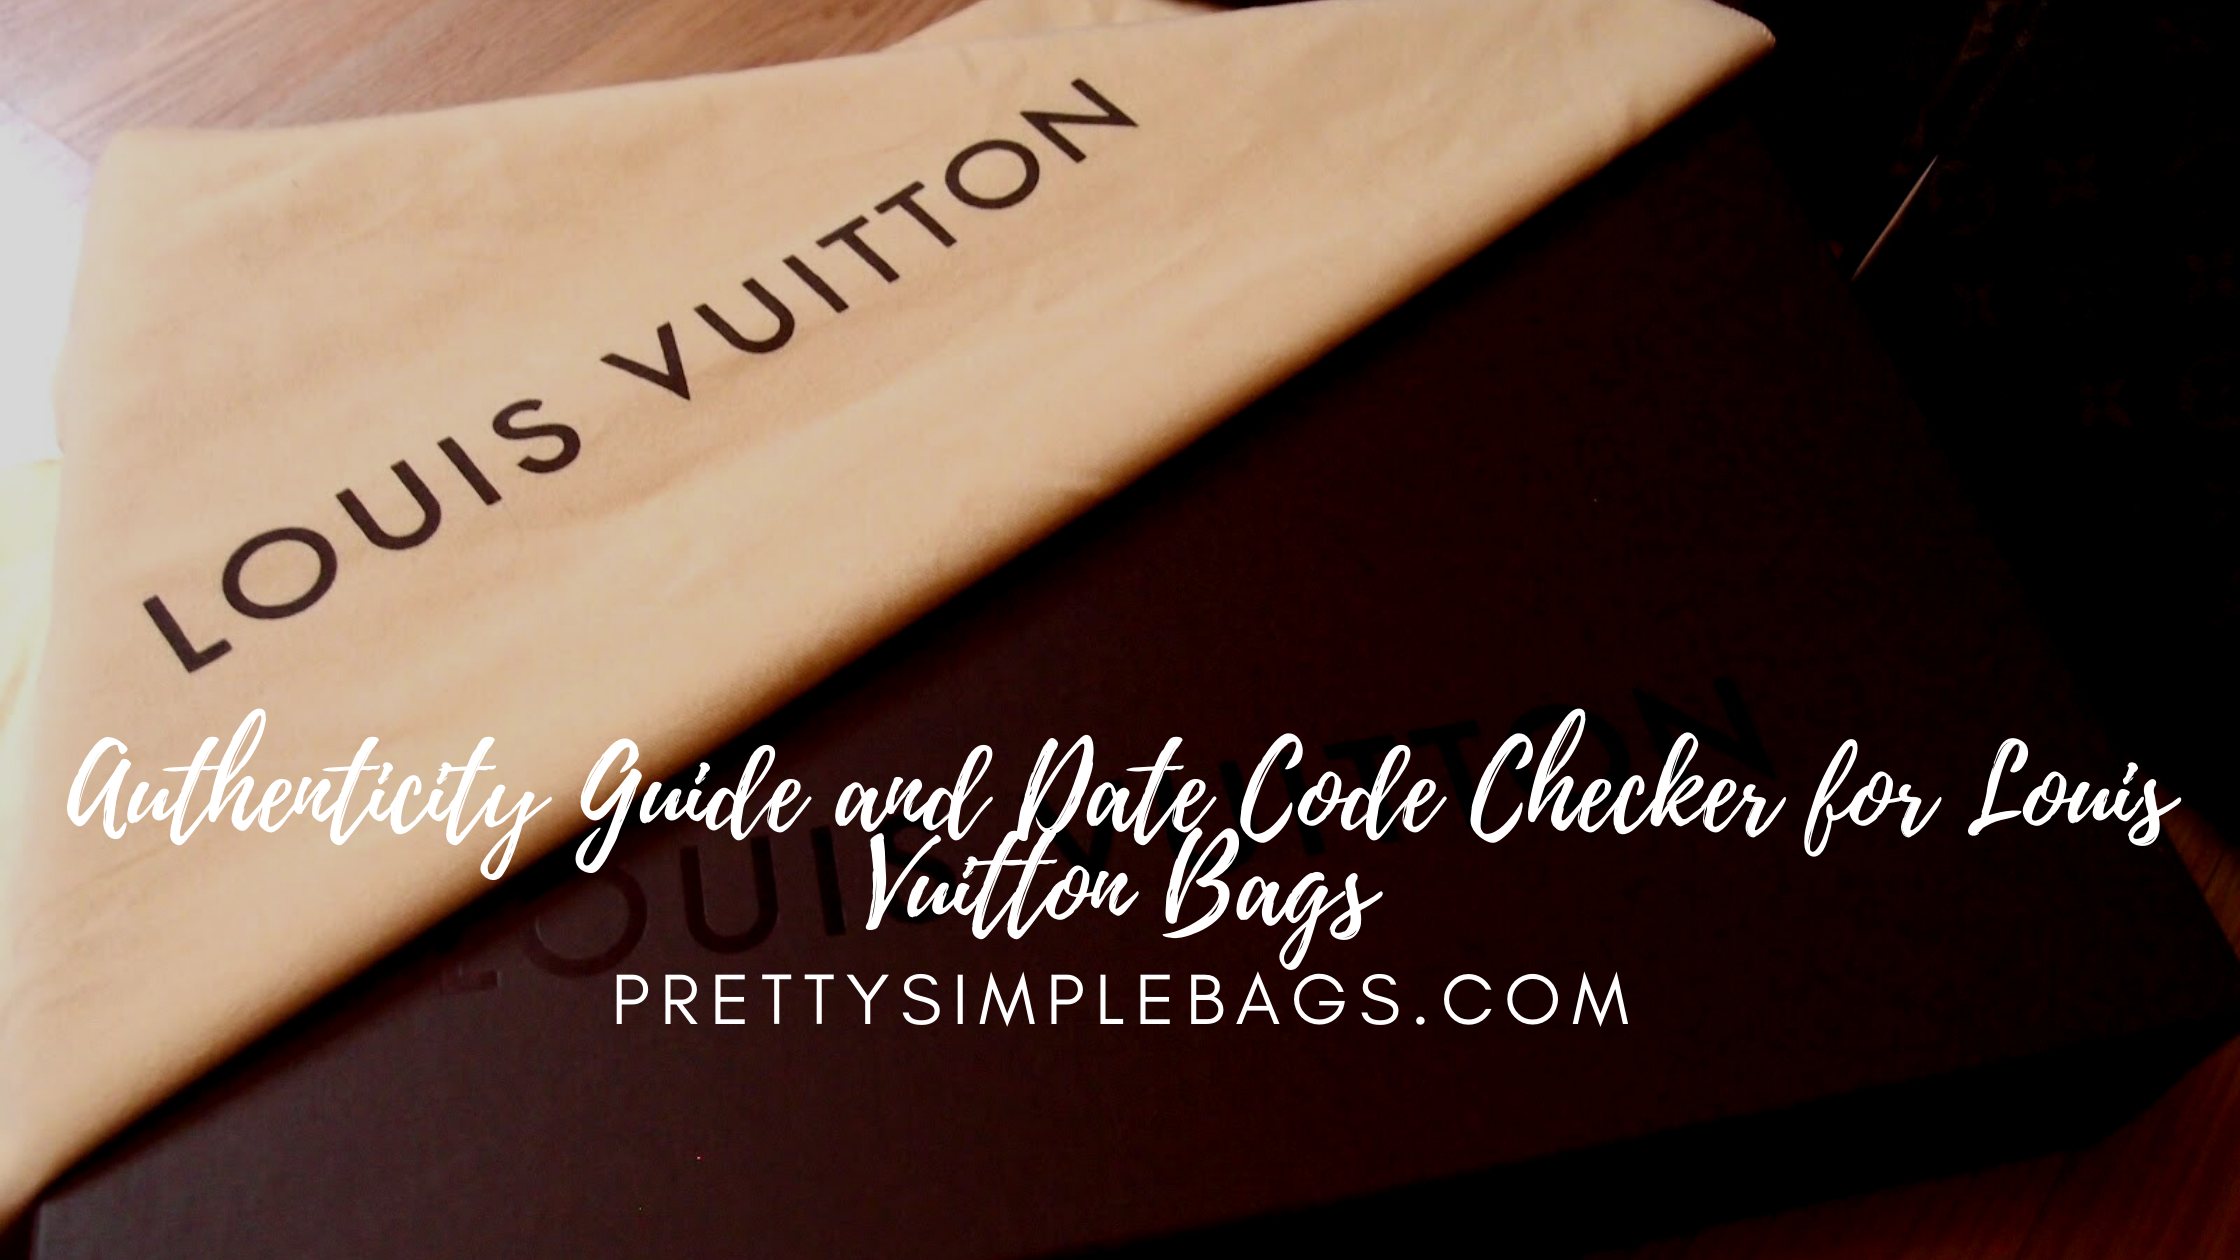 Authenticity Guide and Date Code Checker for Louis Vuitton Bags